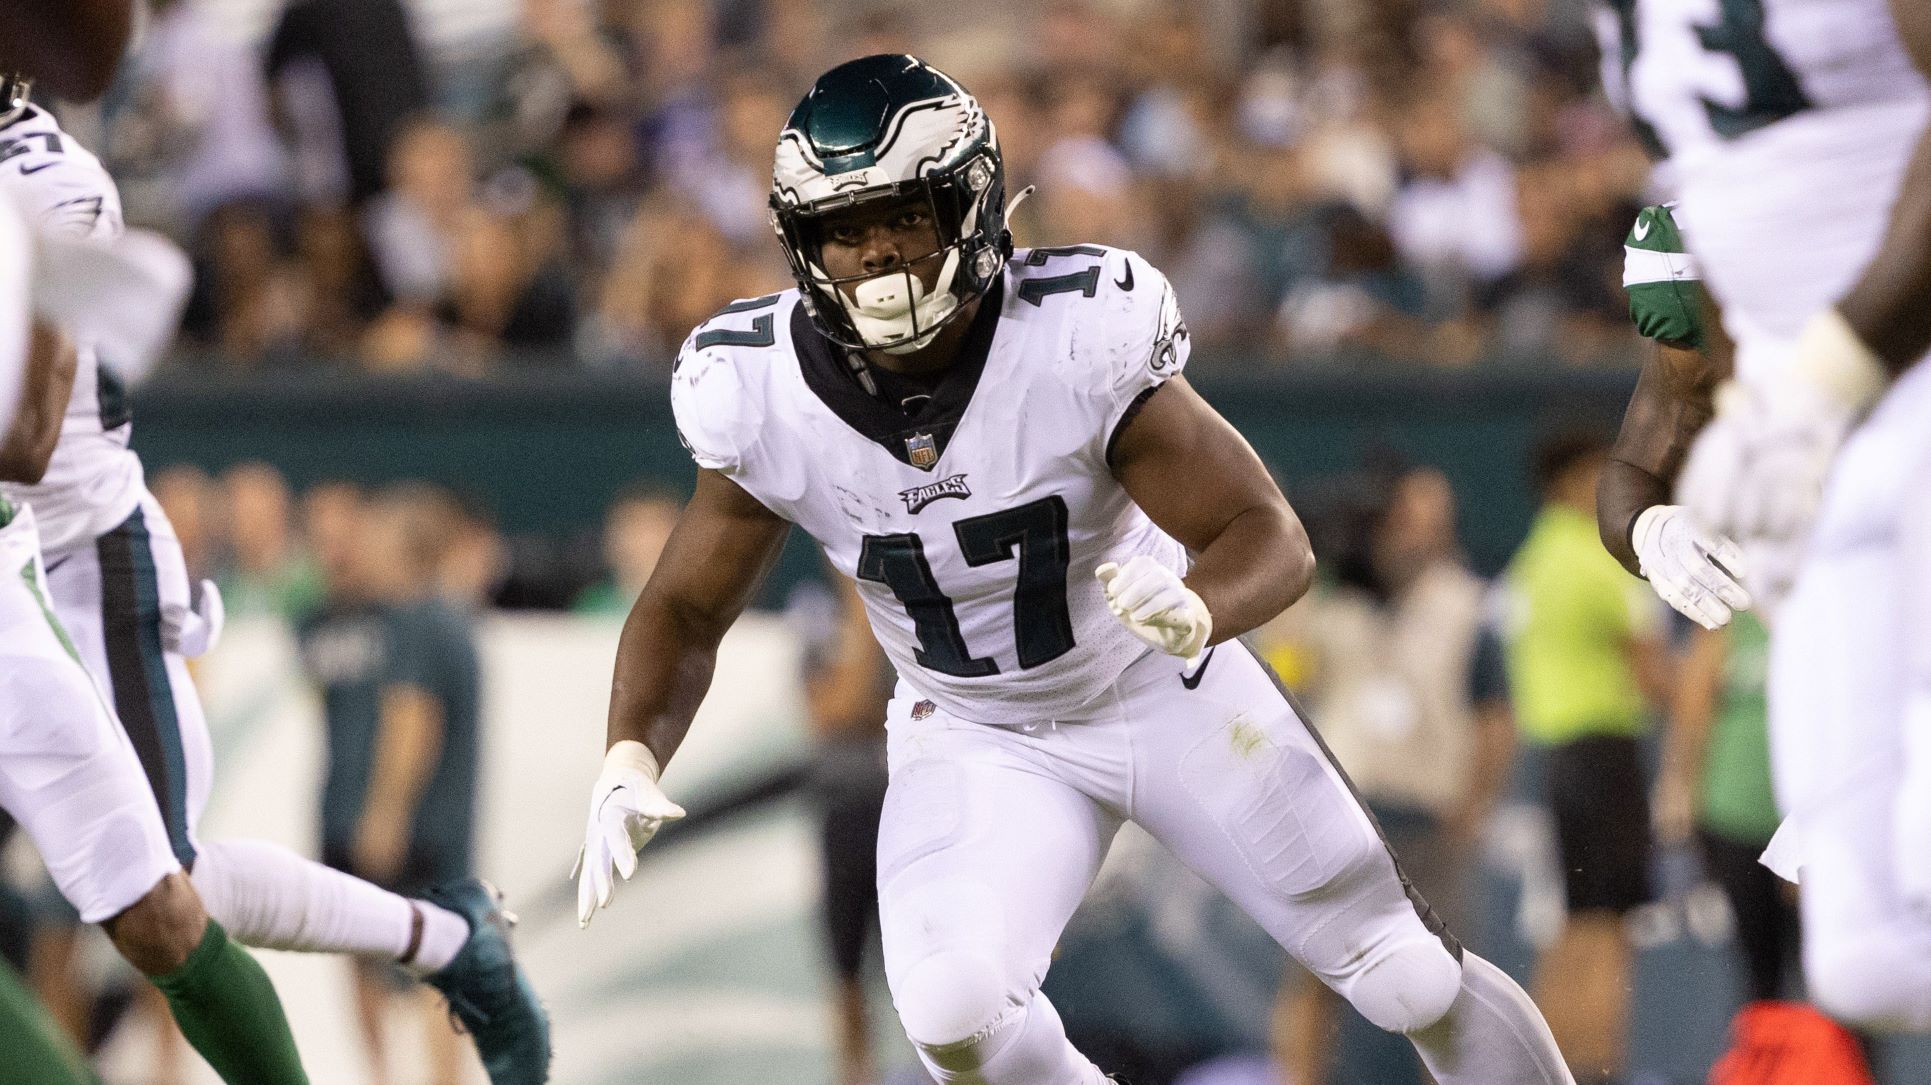 Eagles Kelly Green jerseys for sale at team pro shops Monday - CBS